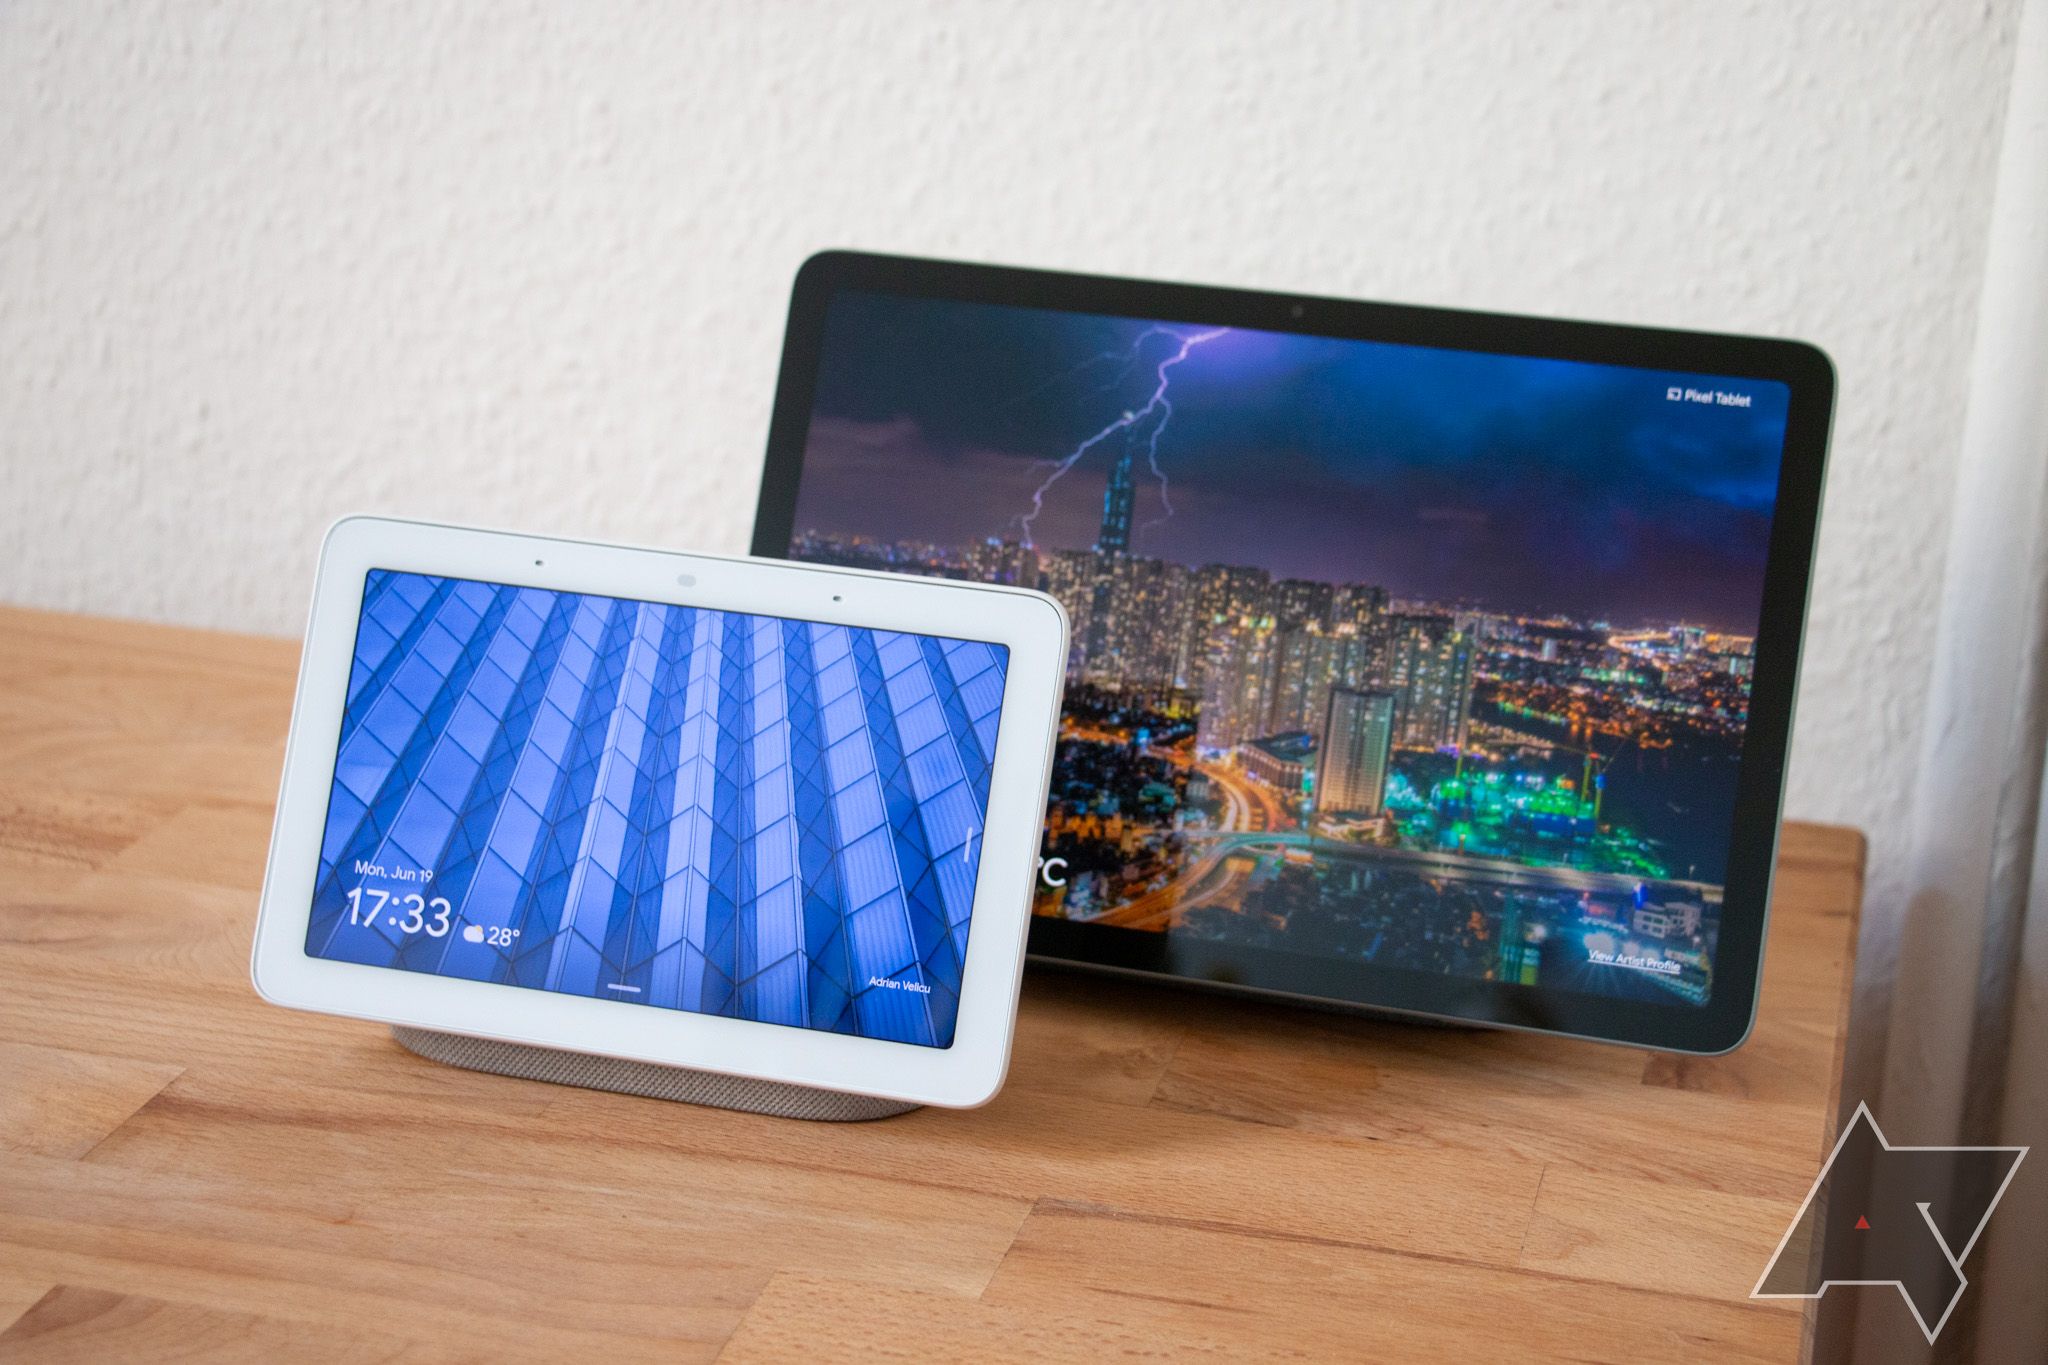 Google Pixel Tablet Review—A Better Smart Home Hub Than Tablet